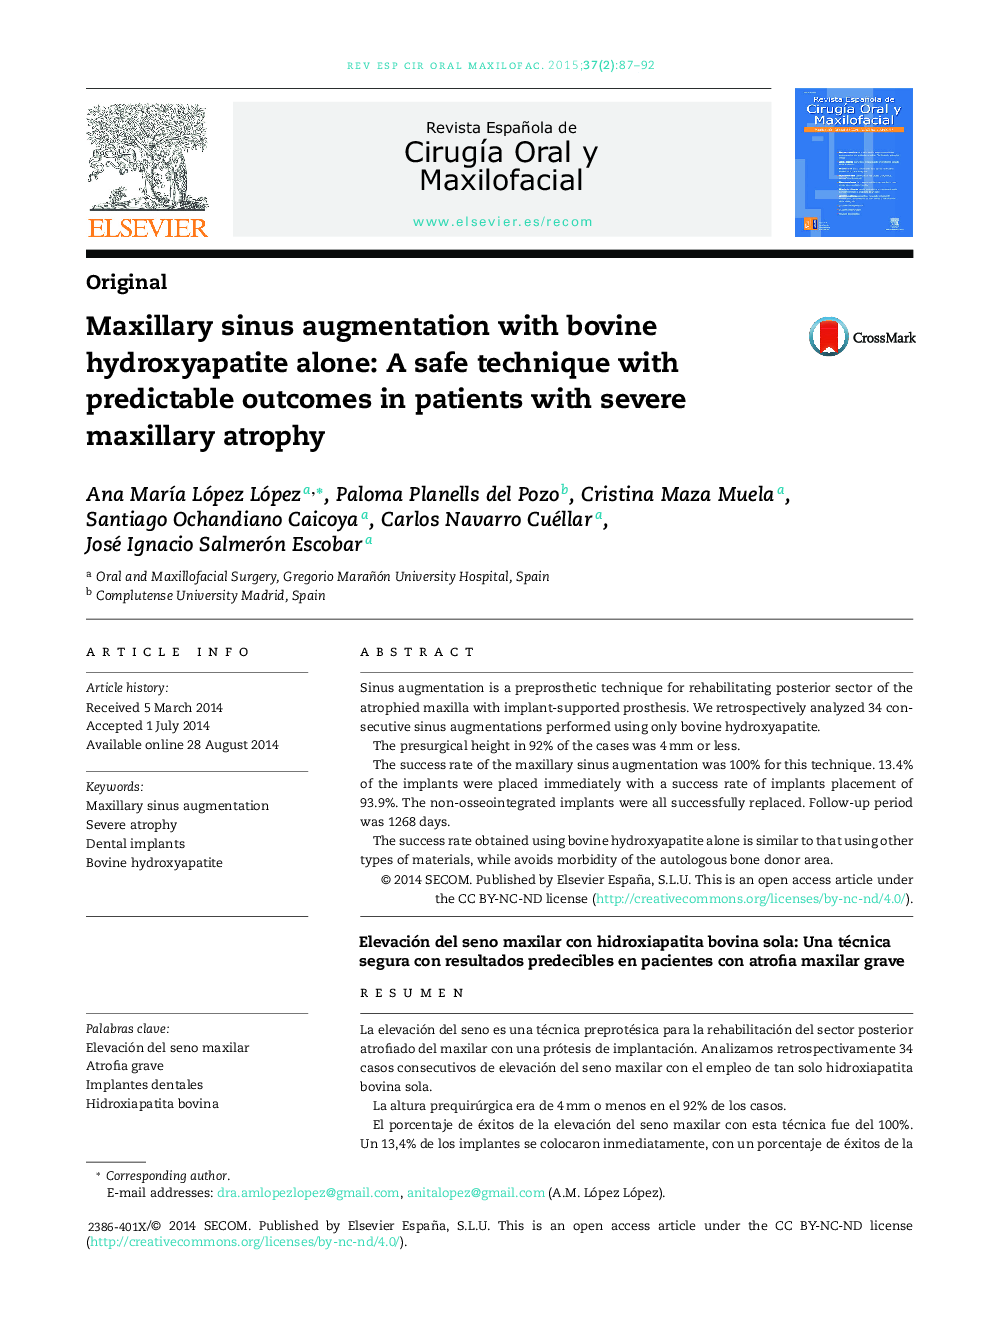 Maxillary sinus augmentation with bovine hydroxyapatite alone: A safe technique with predictable outcomes in patients with severe maxillary atrophy